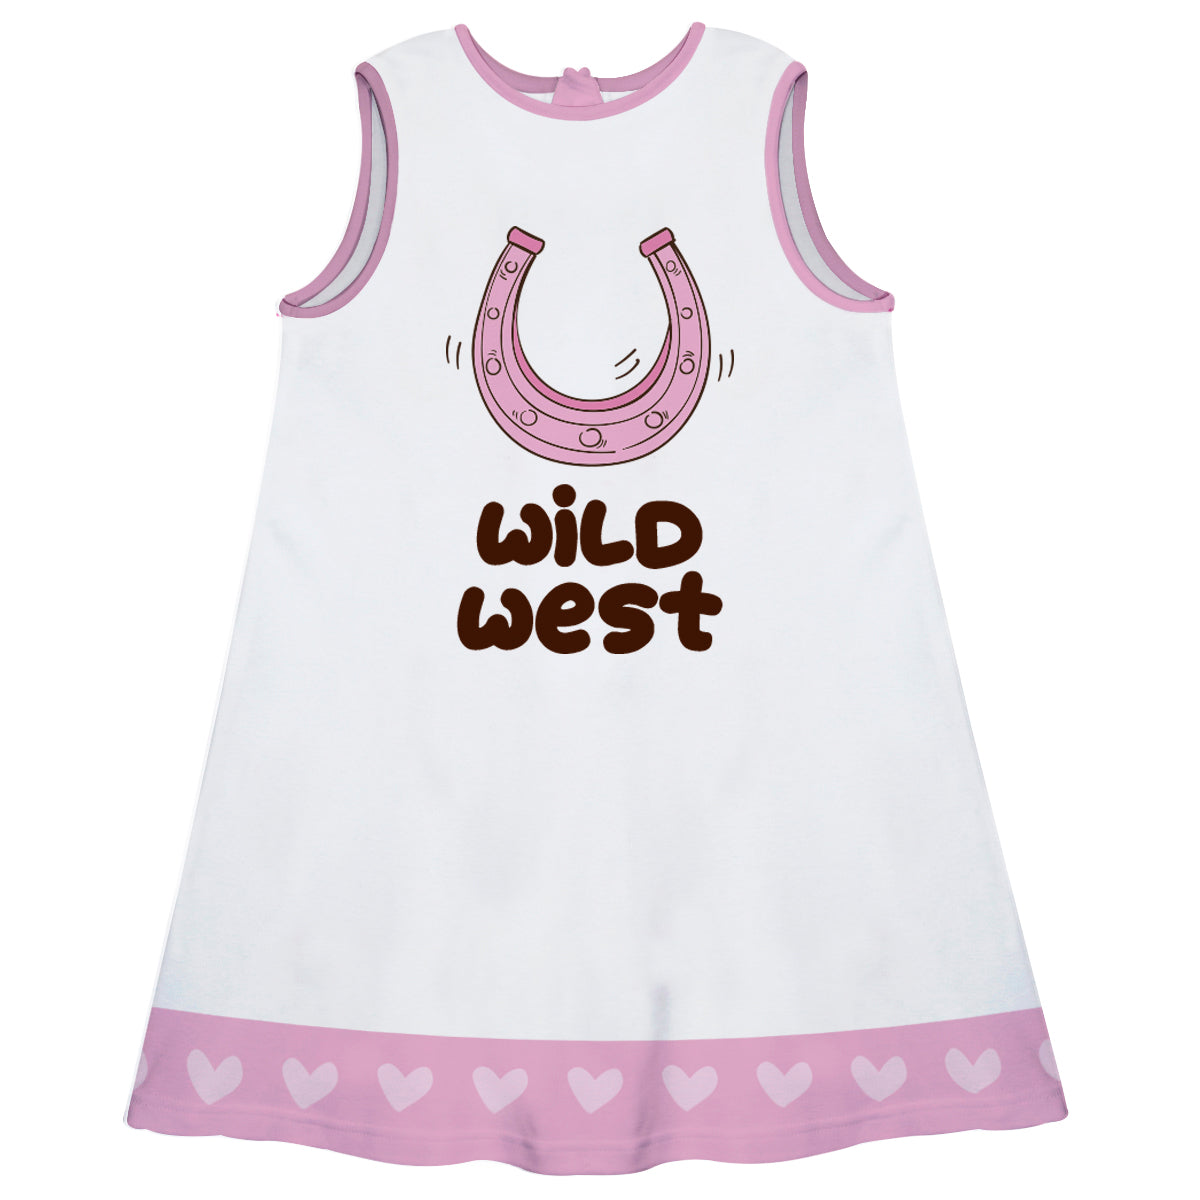 Wild West White A Lined Dress - Wimziy&Co.